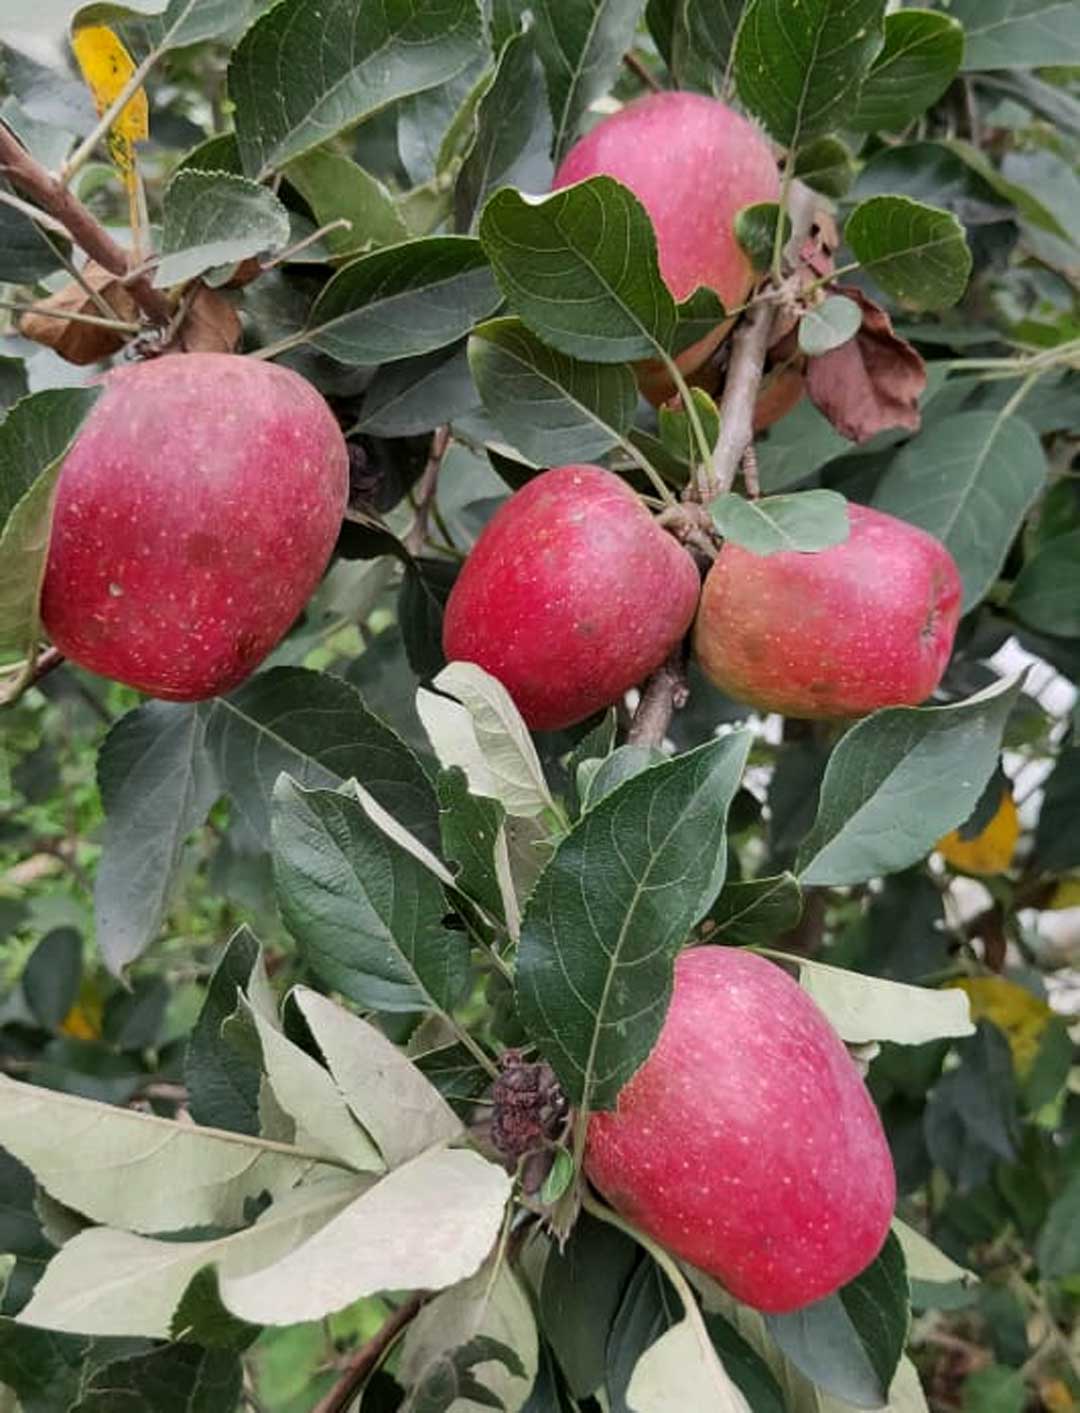 HRMN-99 tropical apples grown in Manipur, a hilly state in North-eastern India with tropical and subtropical weather zones. Summer temperatures can be as high as 40 degrees Celsius. Courtesy of Harman Singh.